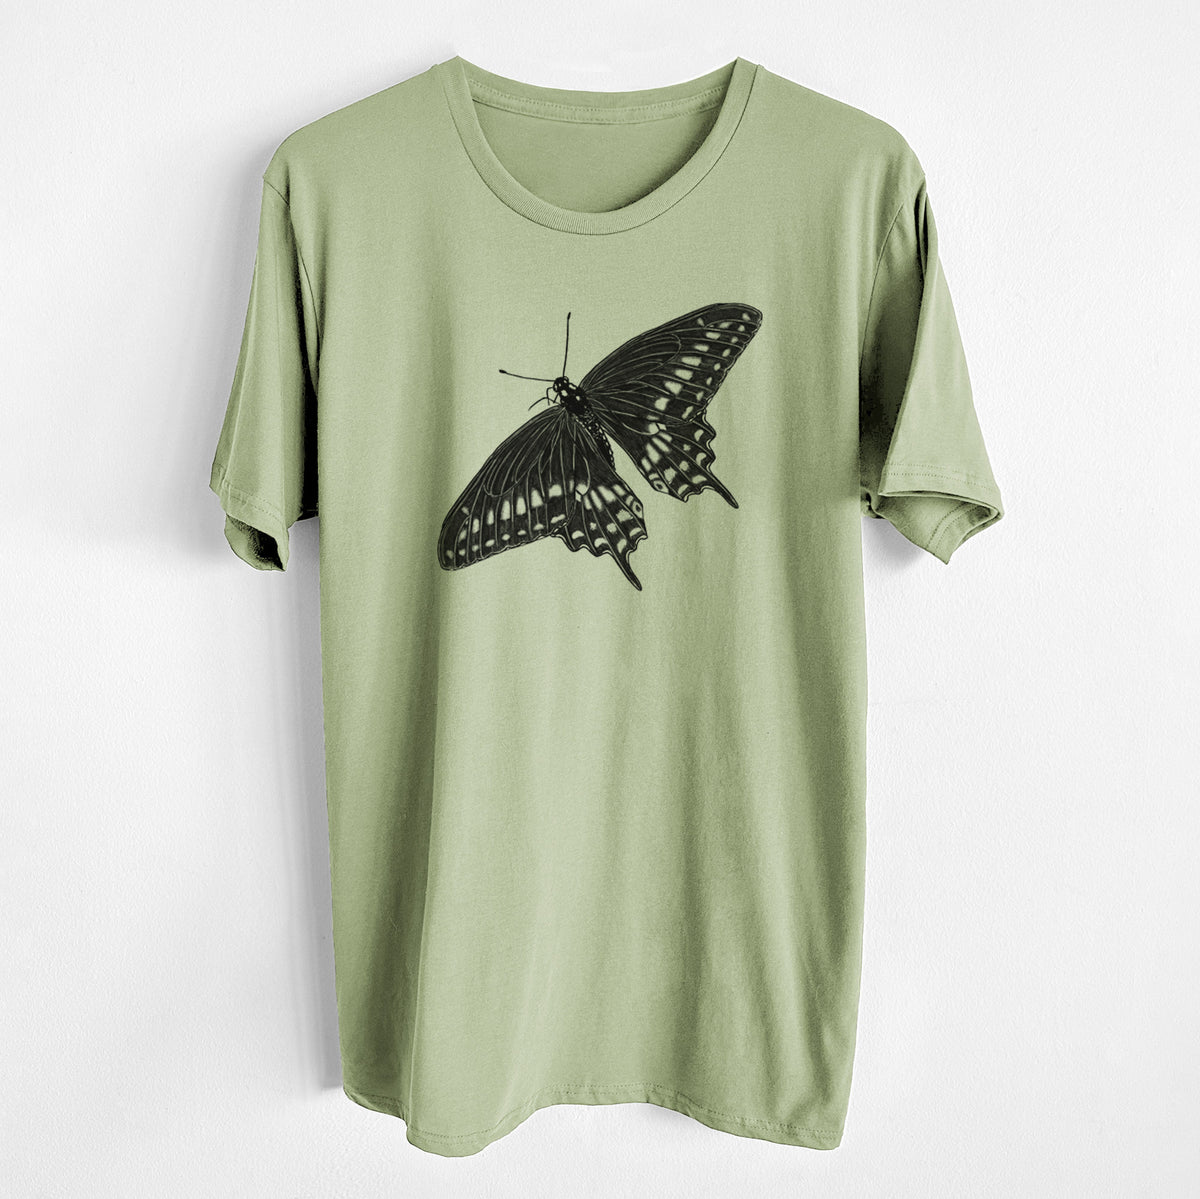 Black Swallowtail Butterfly - Papilio polyxenes - Unisex Crewneck - Made in USA - 100% Organic Cotton